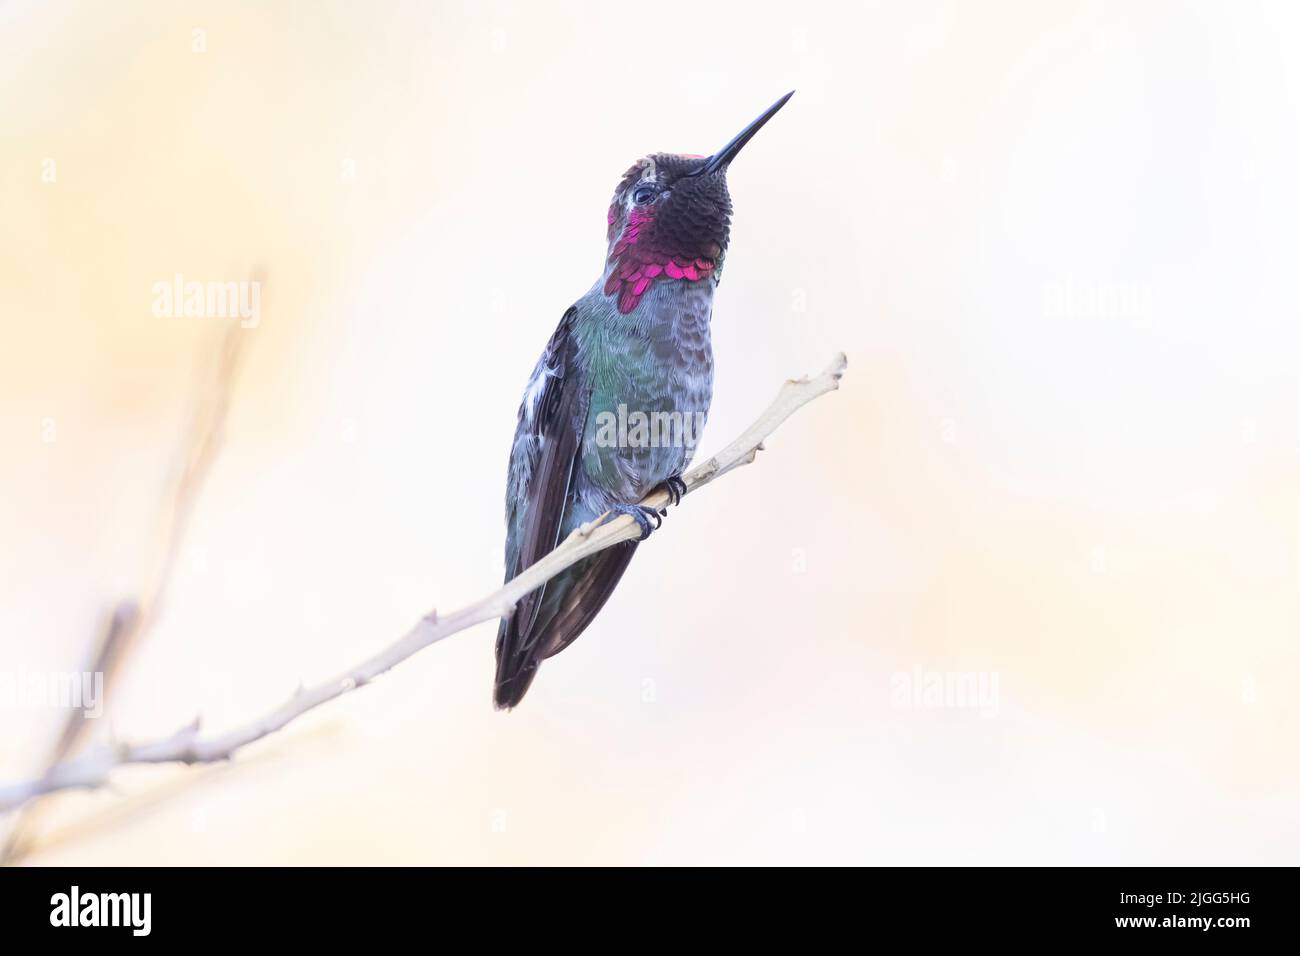 An adult male Anna's hummingbird, Calypte anna, perched on a territorial branch in California's San Joaquin Valley. Stock Photo